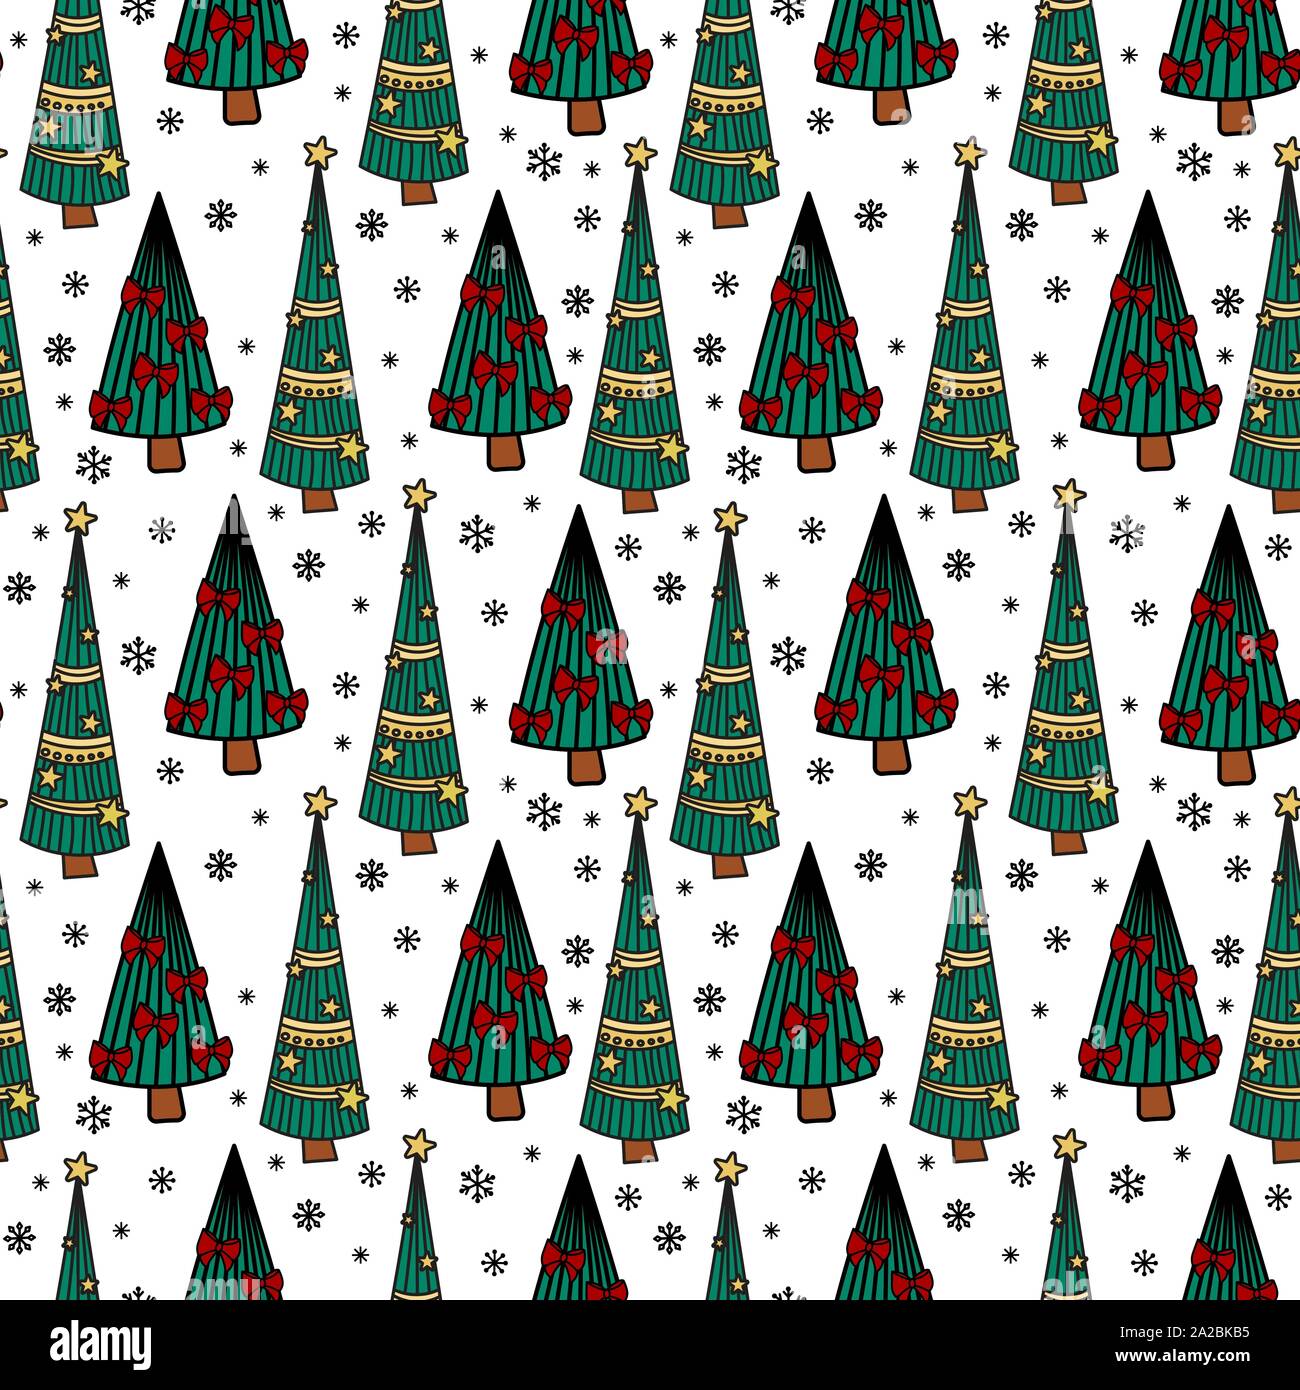 Seamless Christmas Tree on Green Wrapping Paper